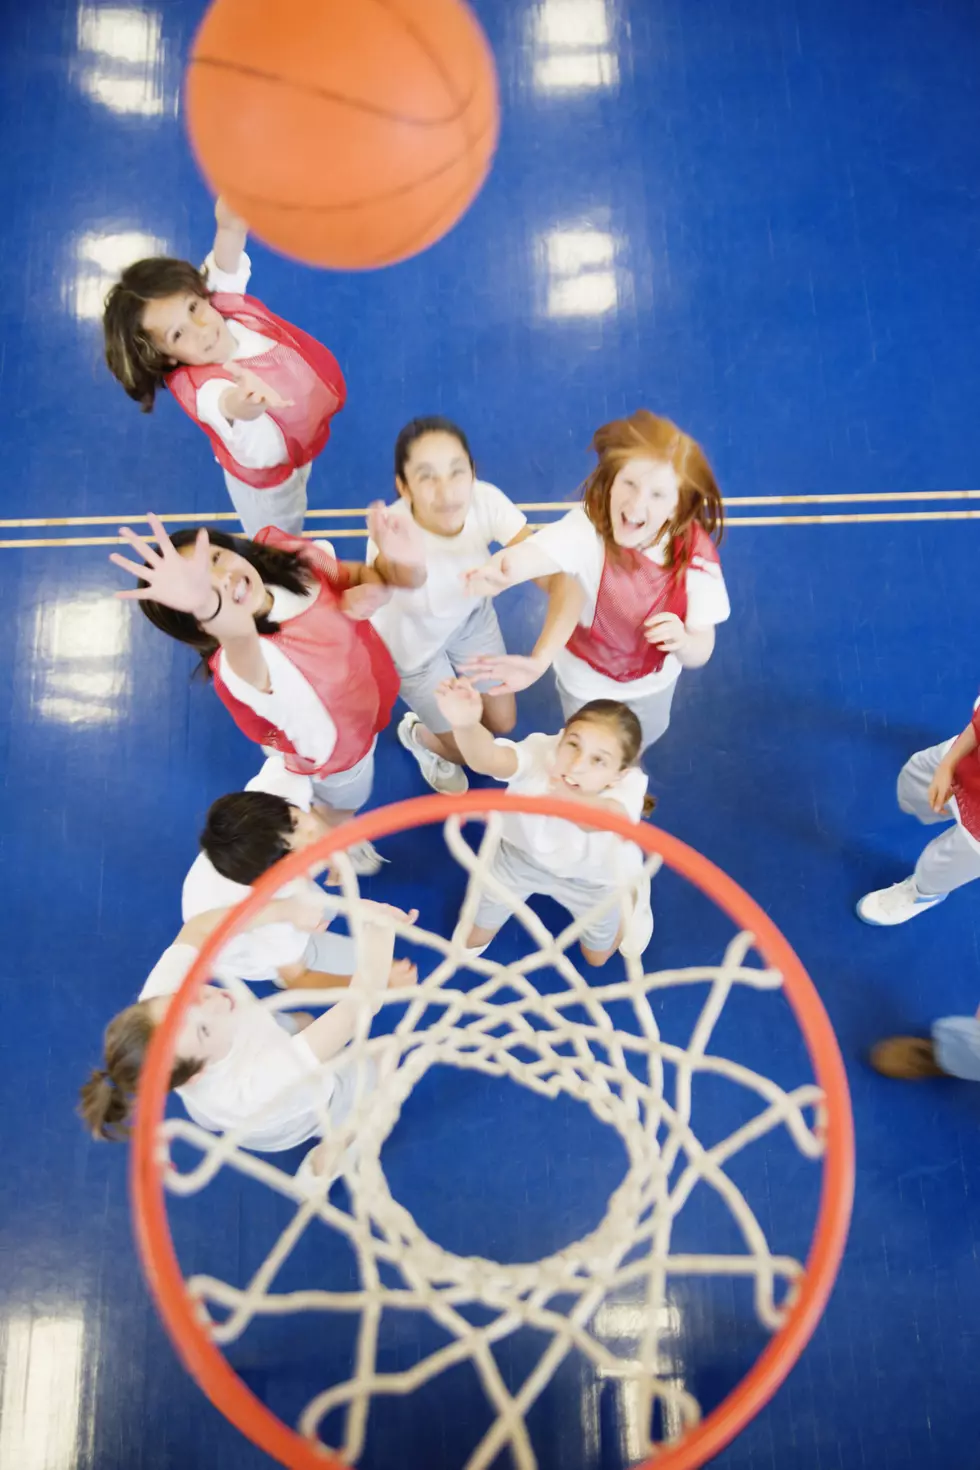 Minnesota Girls Basketball Team Kicked out of League for Being &#8216;Too Good&#8217;